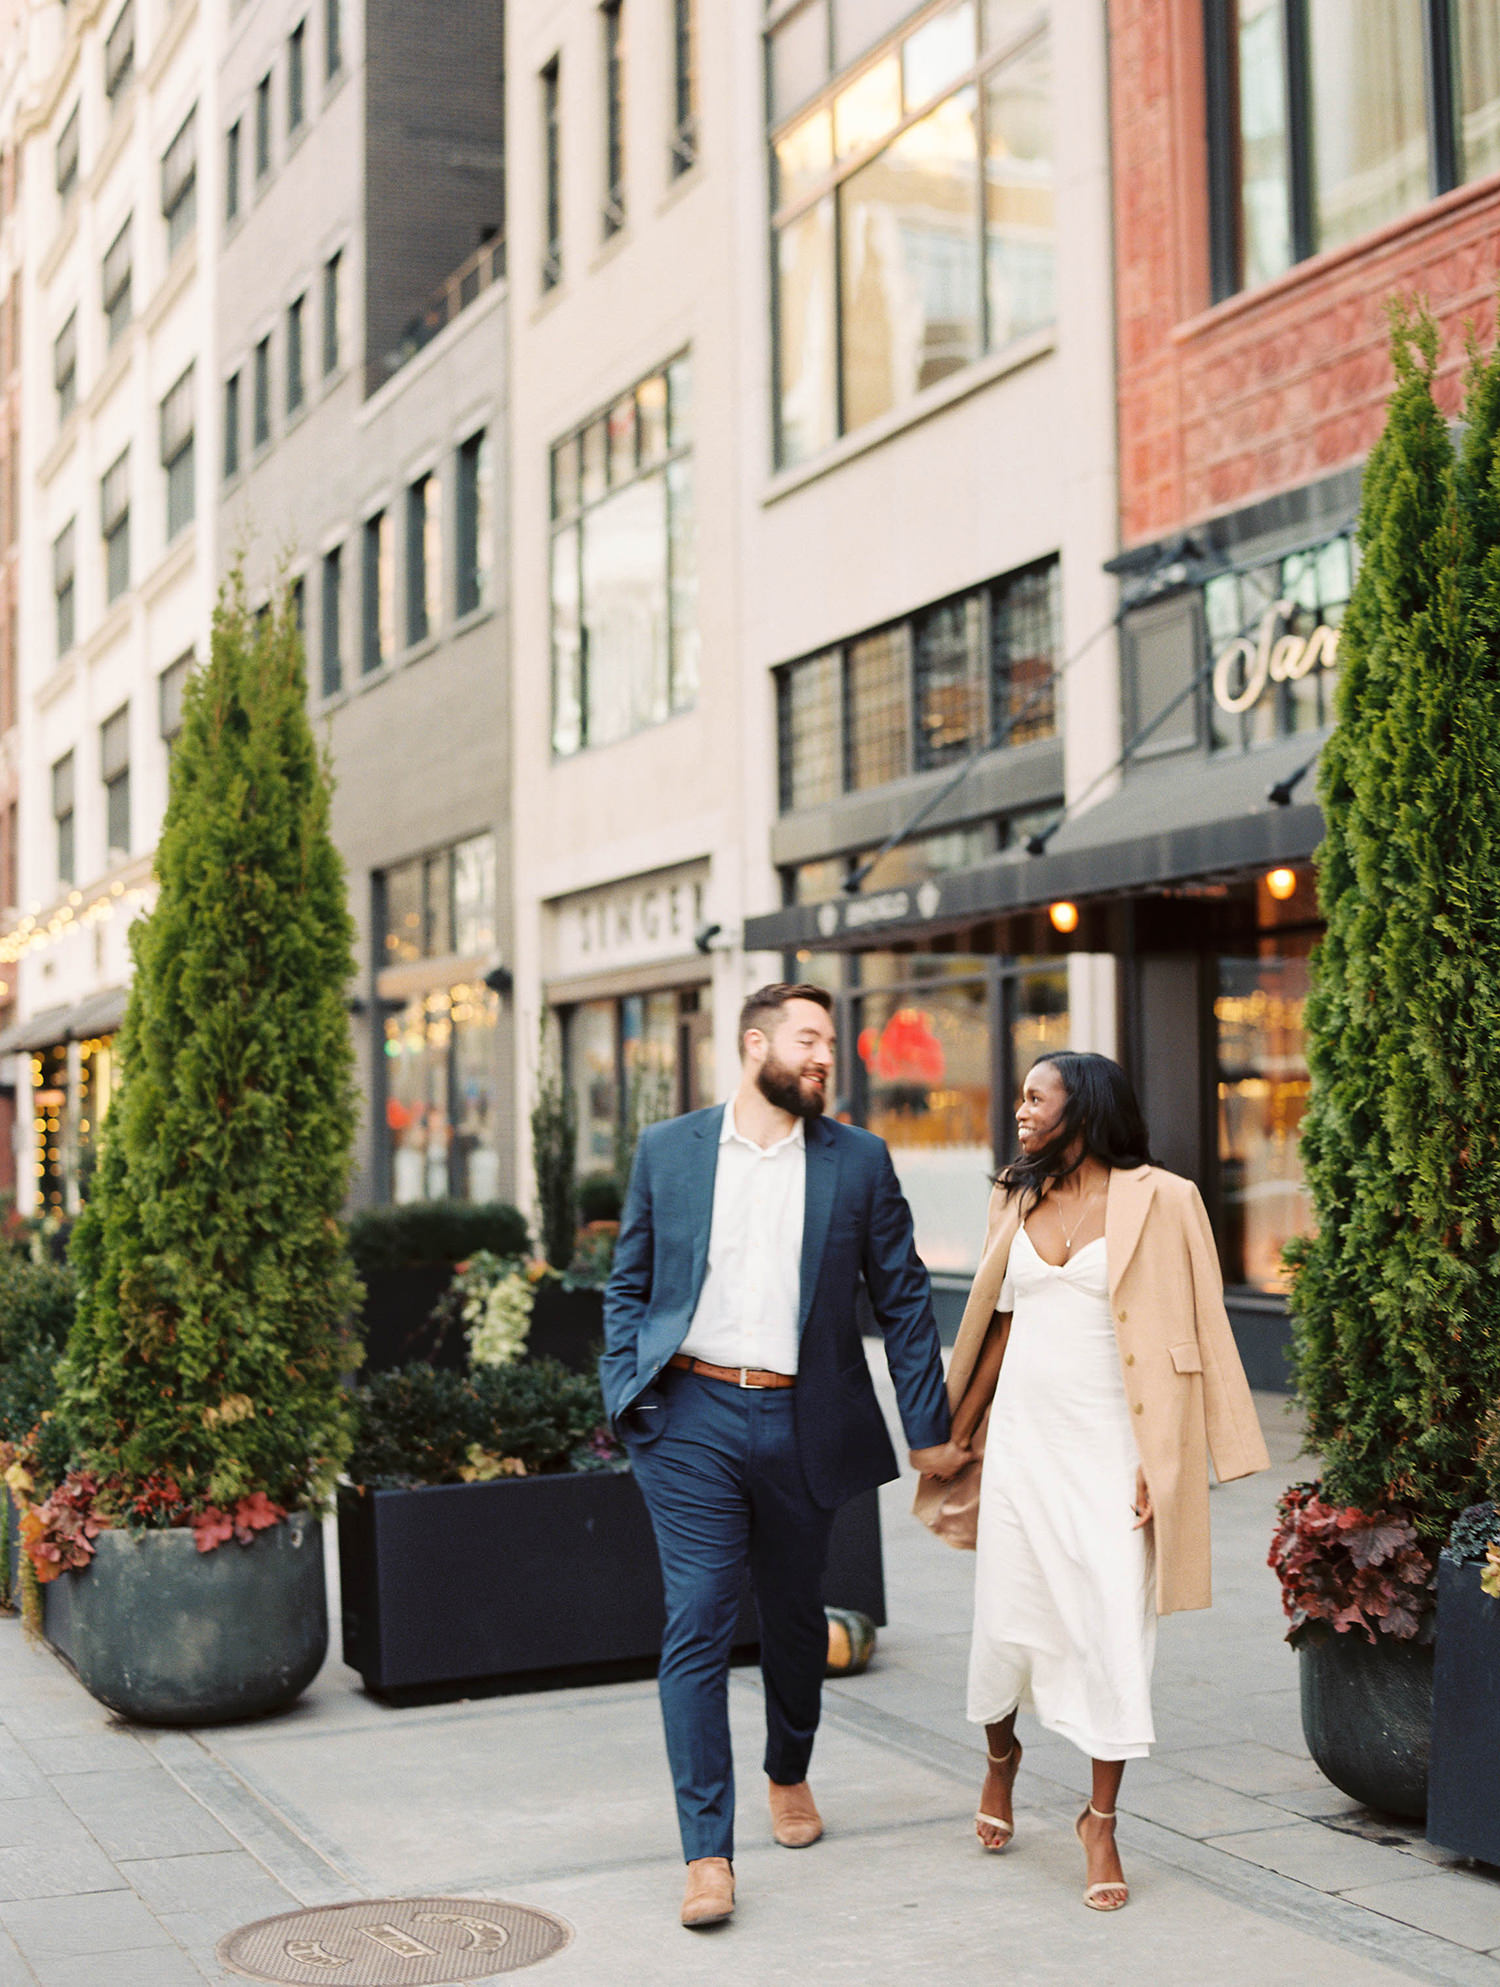 Bride and groom to be walking on street in from on Shinola Hotel Detroit